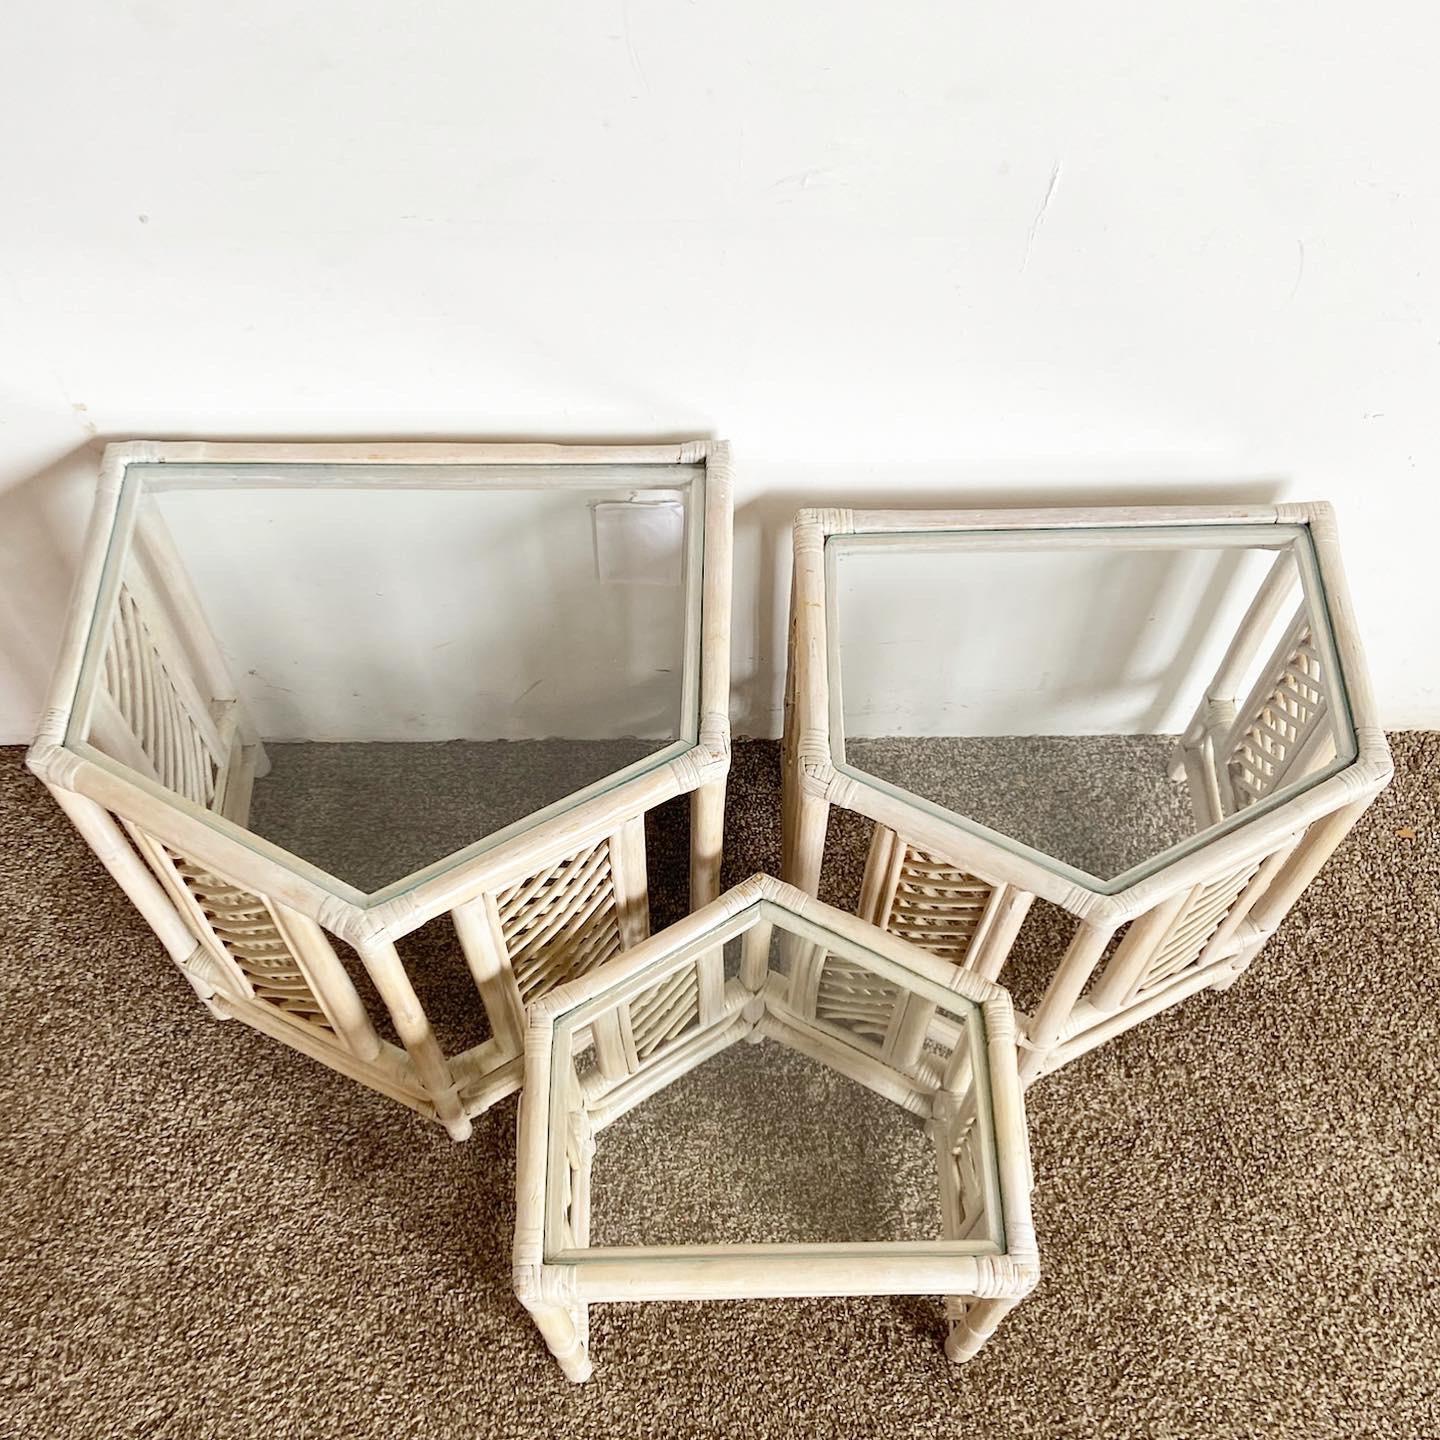 Elevate your living space with this set of 3 Boho Chic Bamboo Rattan Nesting Tables. Featuring a white-washed finish and 